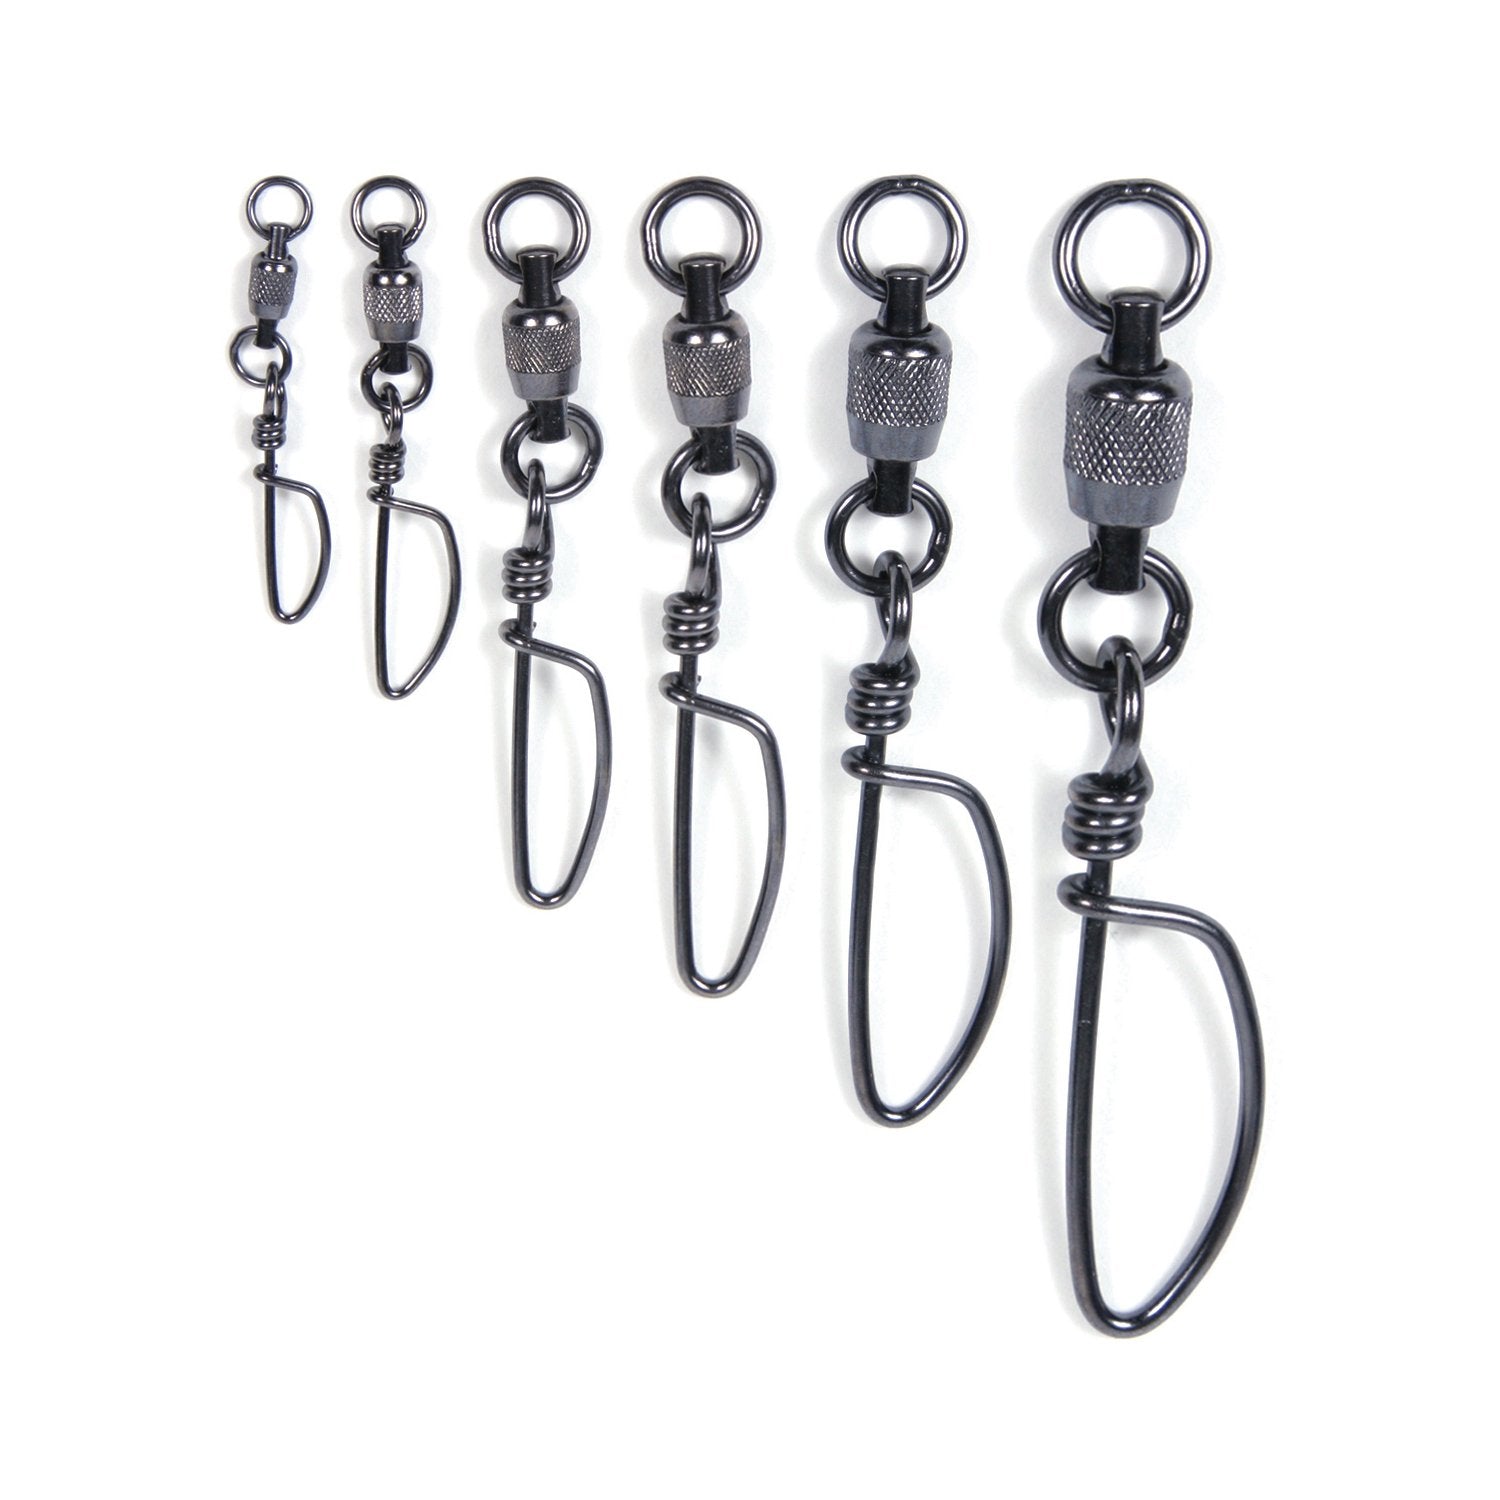 Stainless Steel Dual Rotation Ball Bearing Snap Swivels 10 Pack